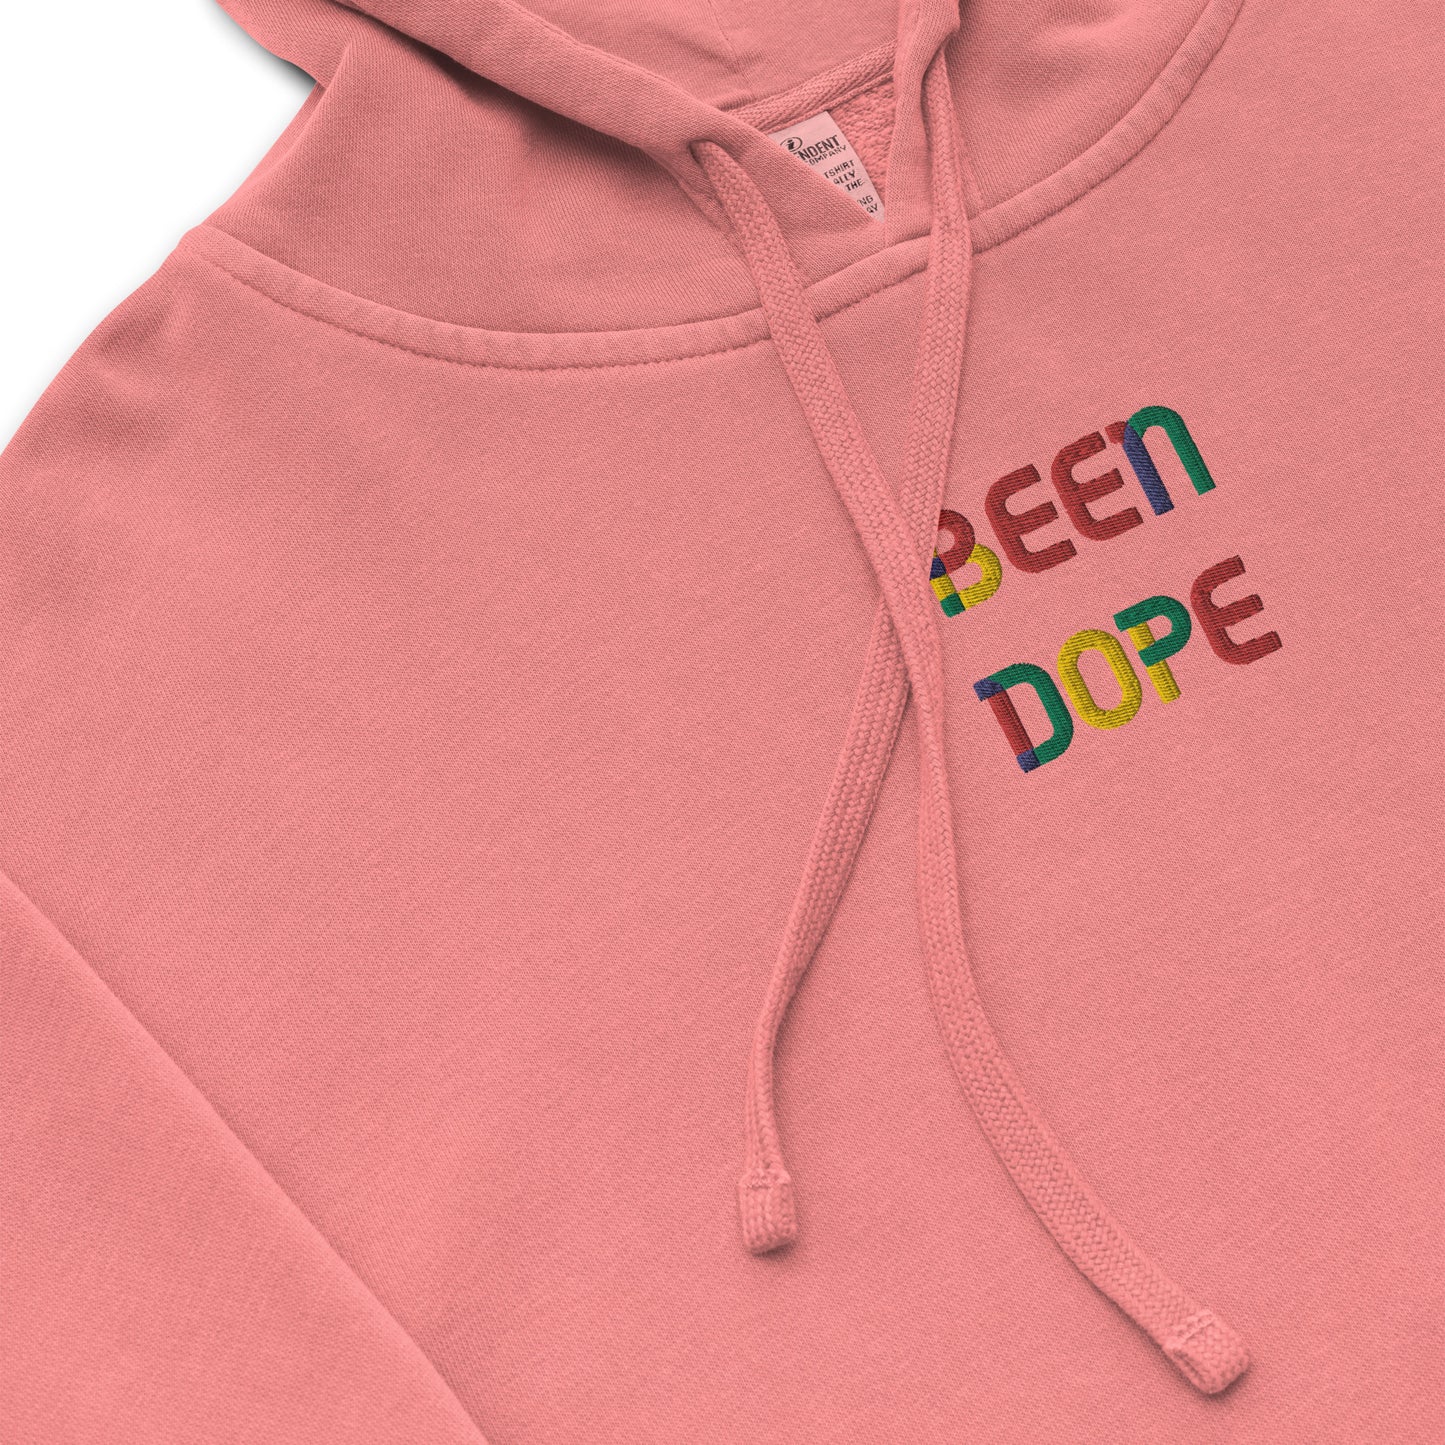 Been Dope Supply Official Hoodie |Washed-Out Pink | Embroidered